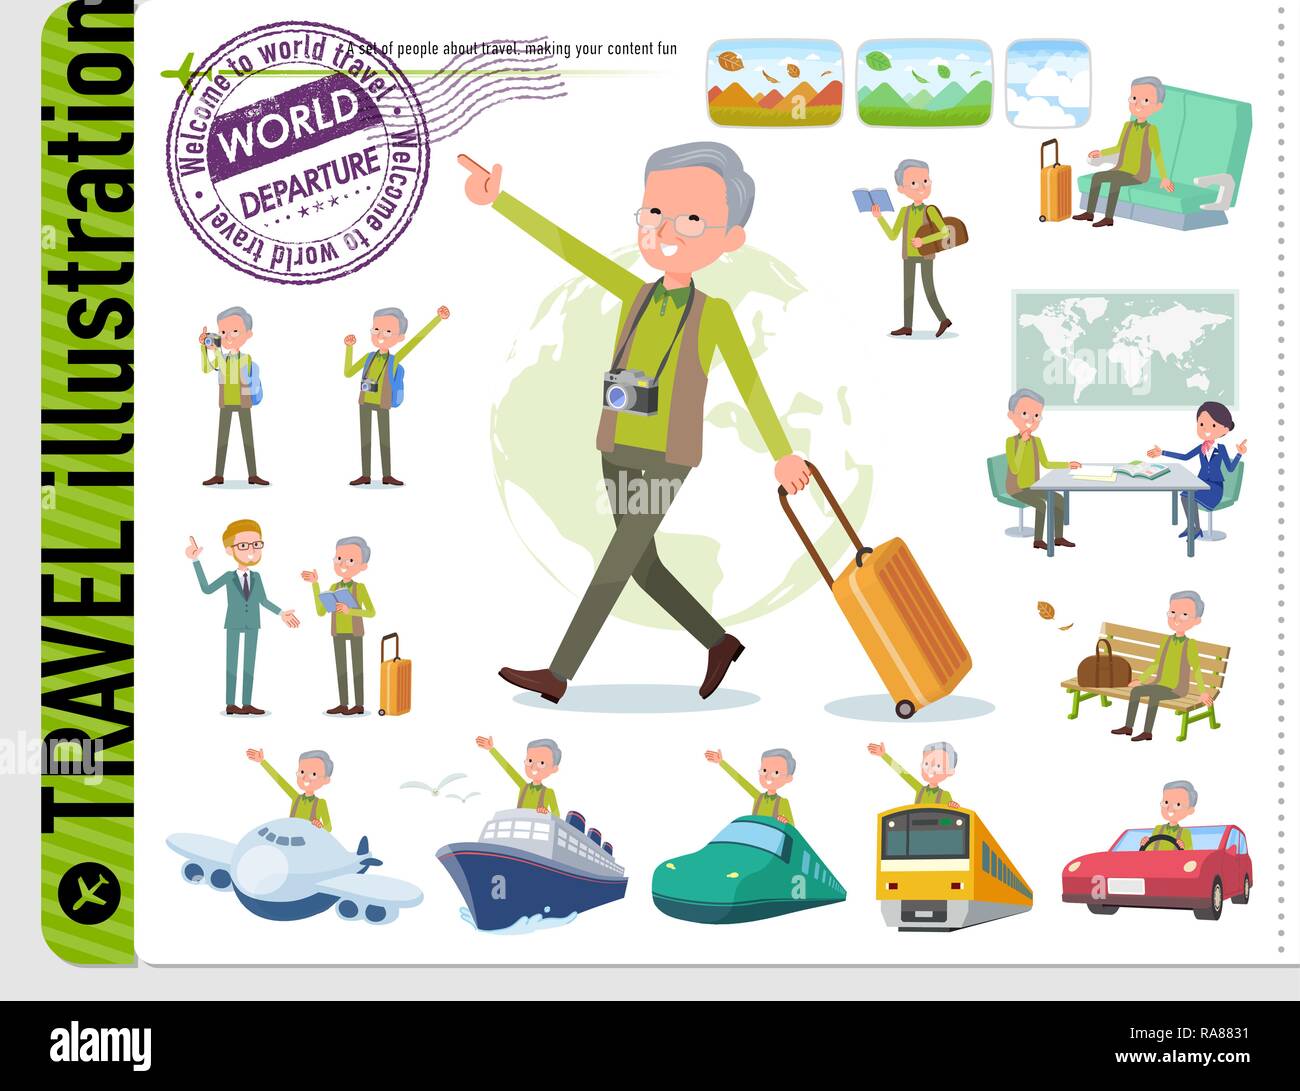 A set of old man on travel.There are also vehicles such as boats and airplanes.It's vector art so it's easy to edit. Stock Vector